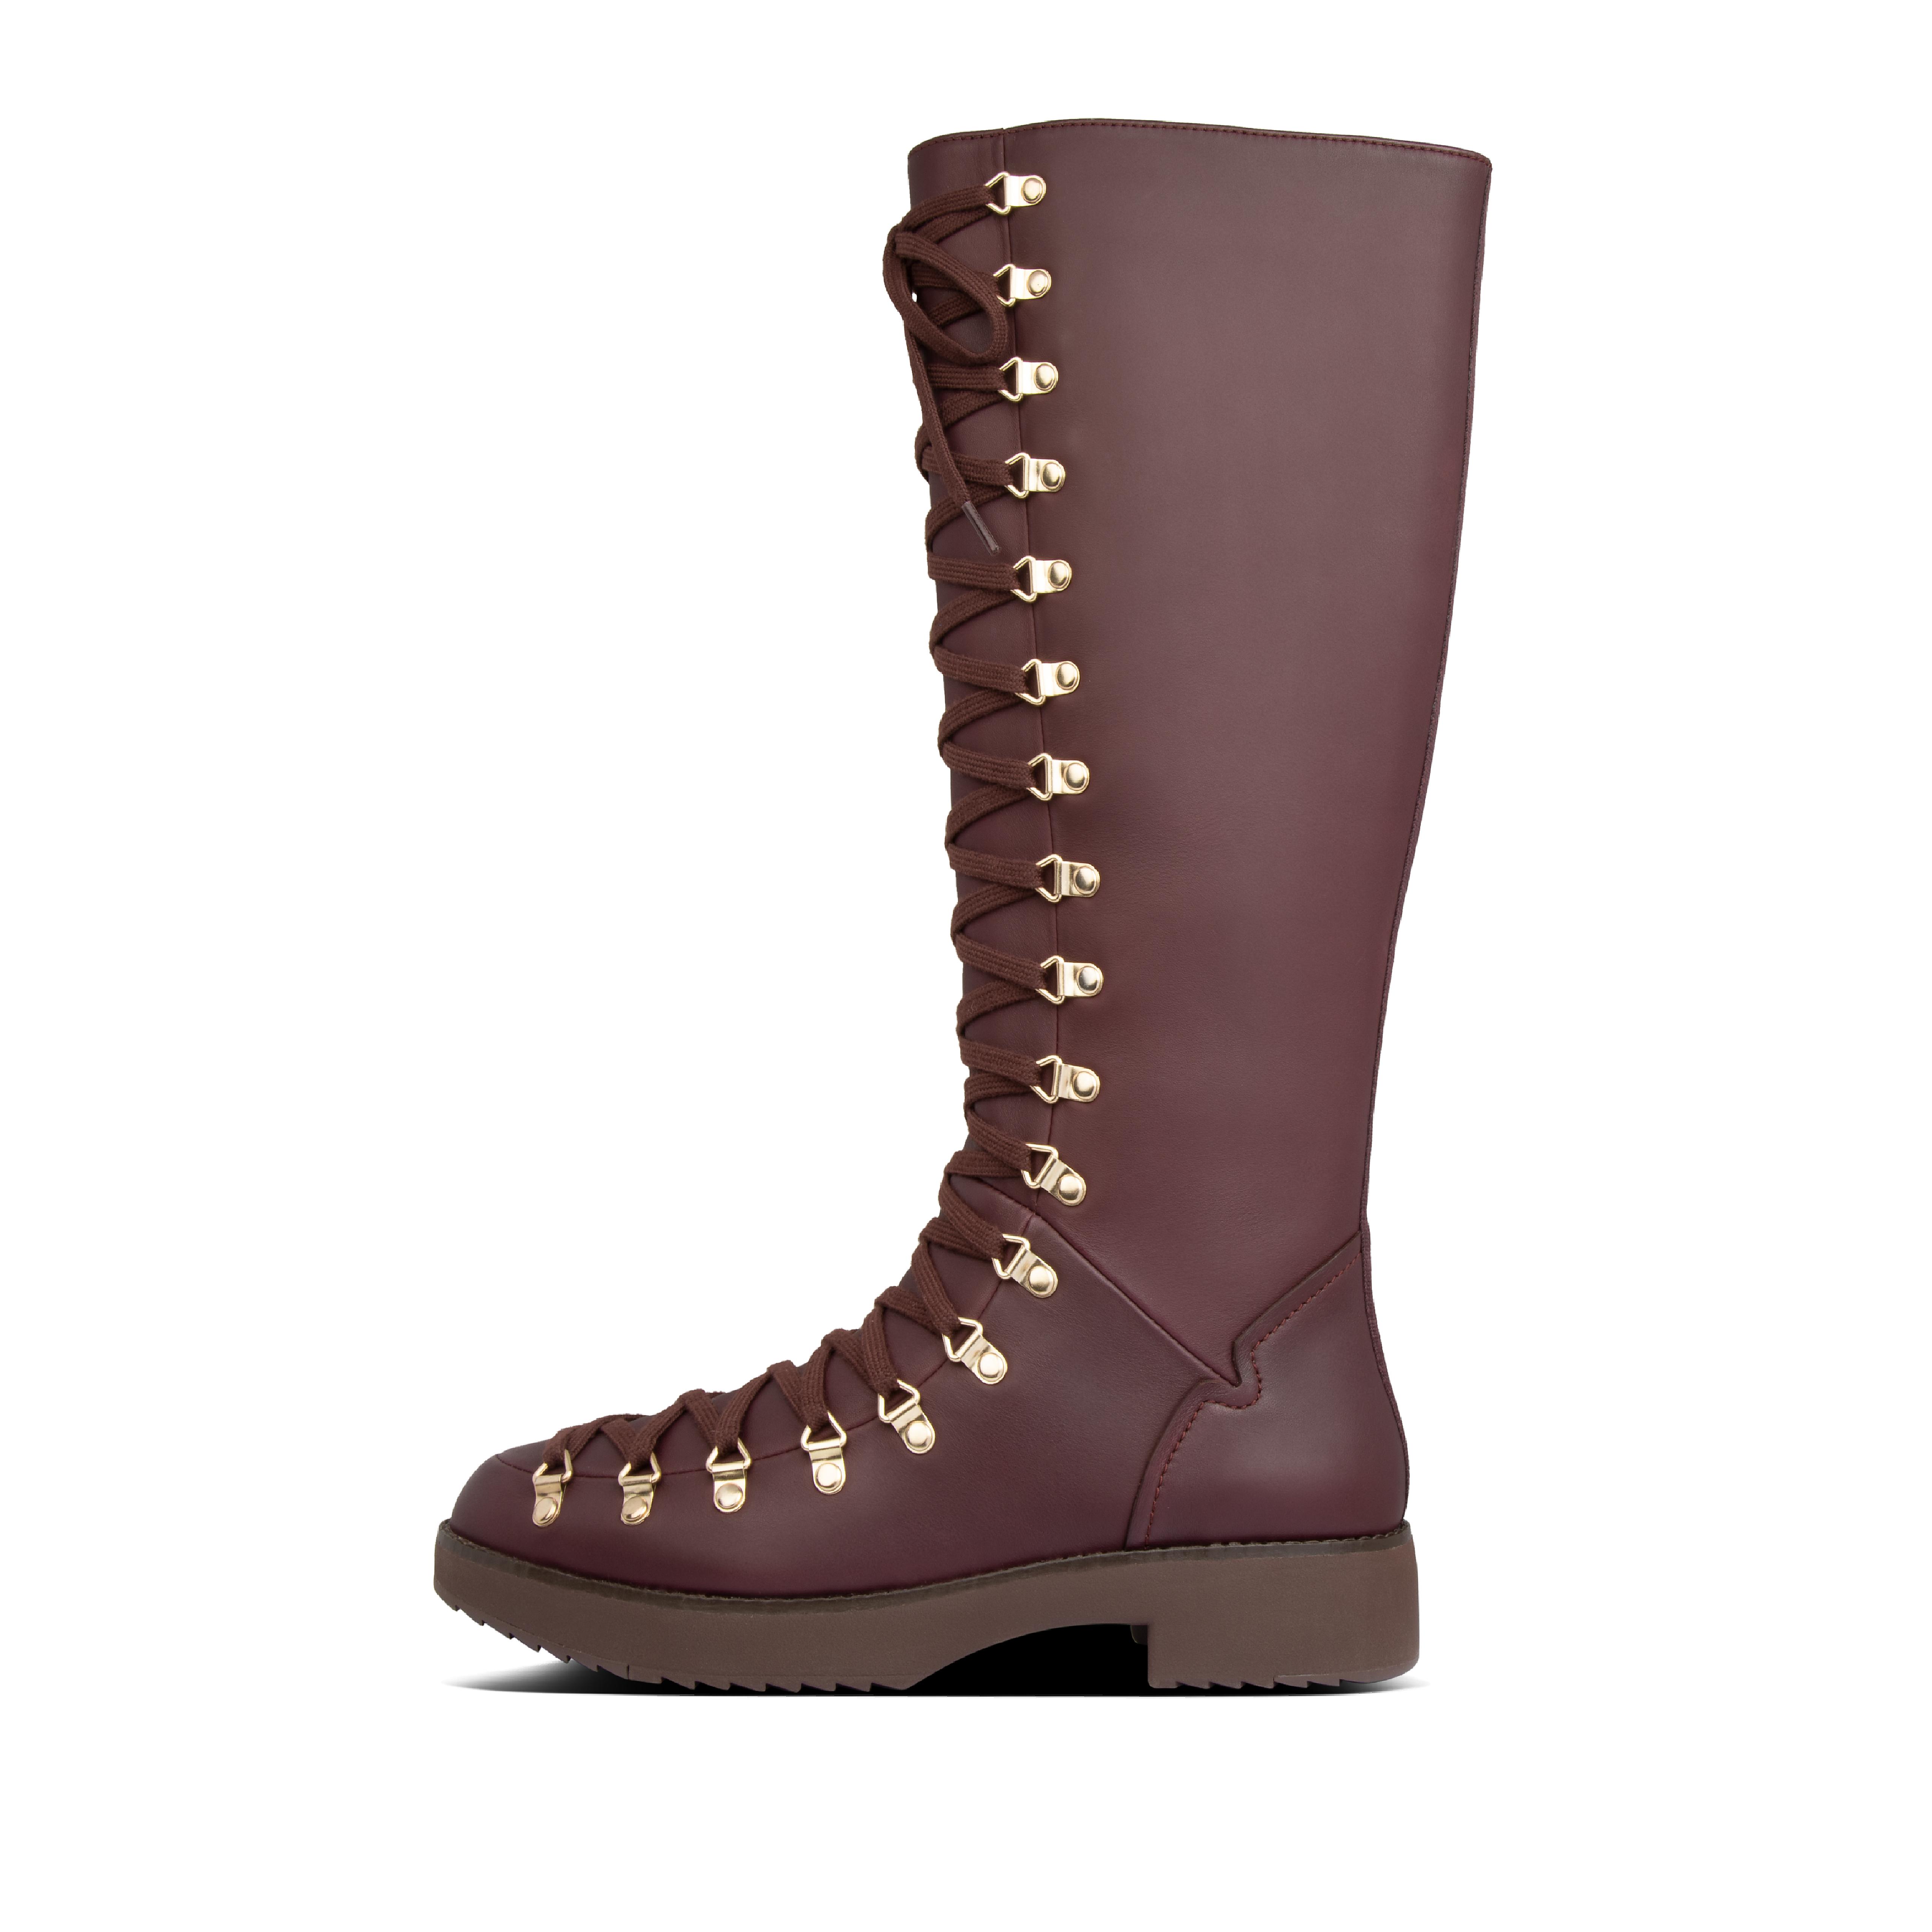 high leather boots womens